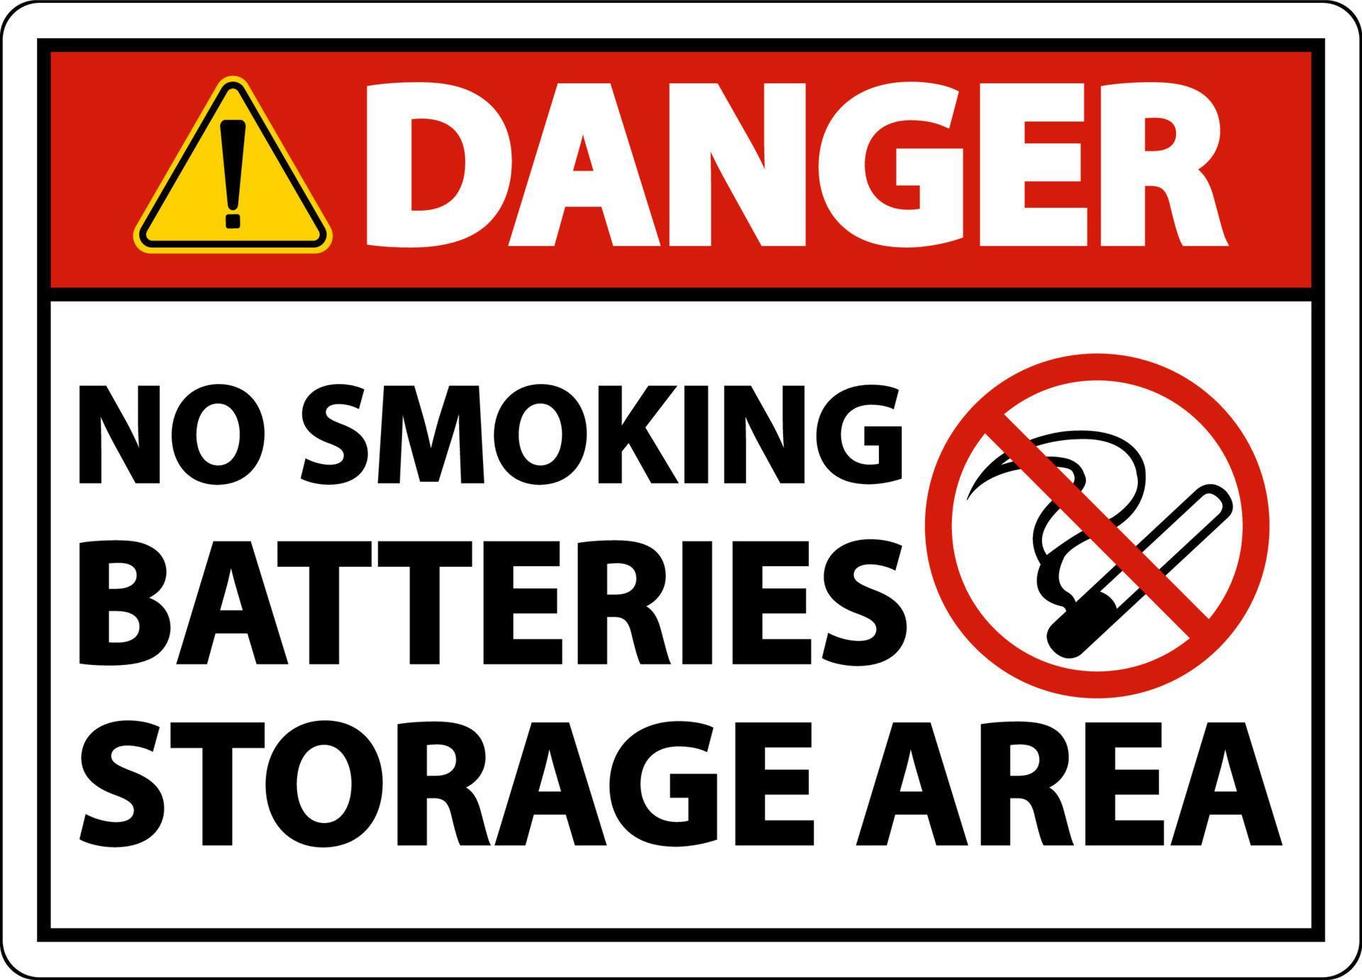 Danger No Smoking Battery Storage Area Sign On White Background vector